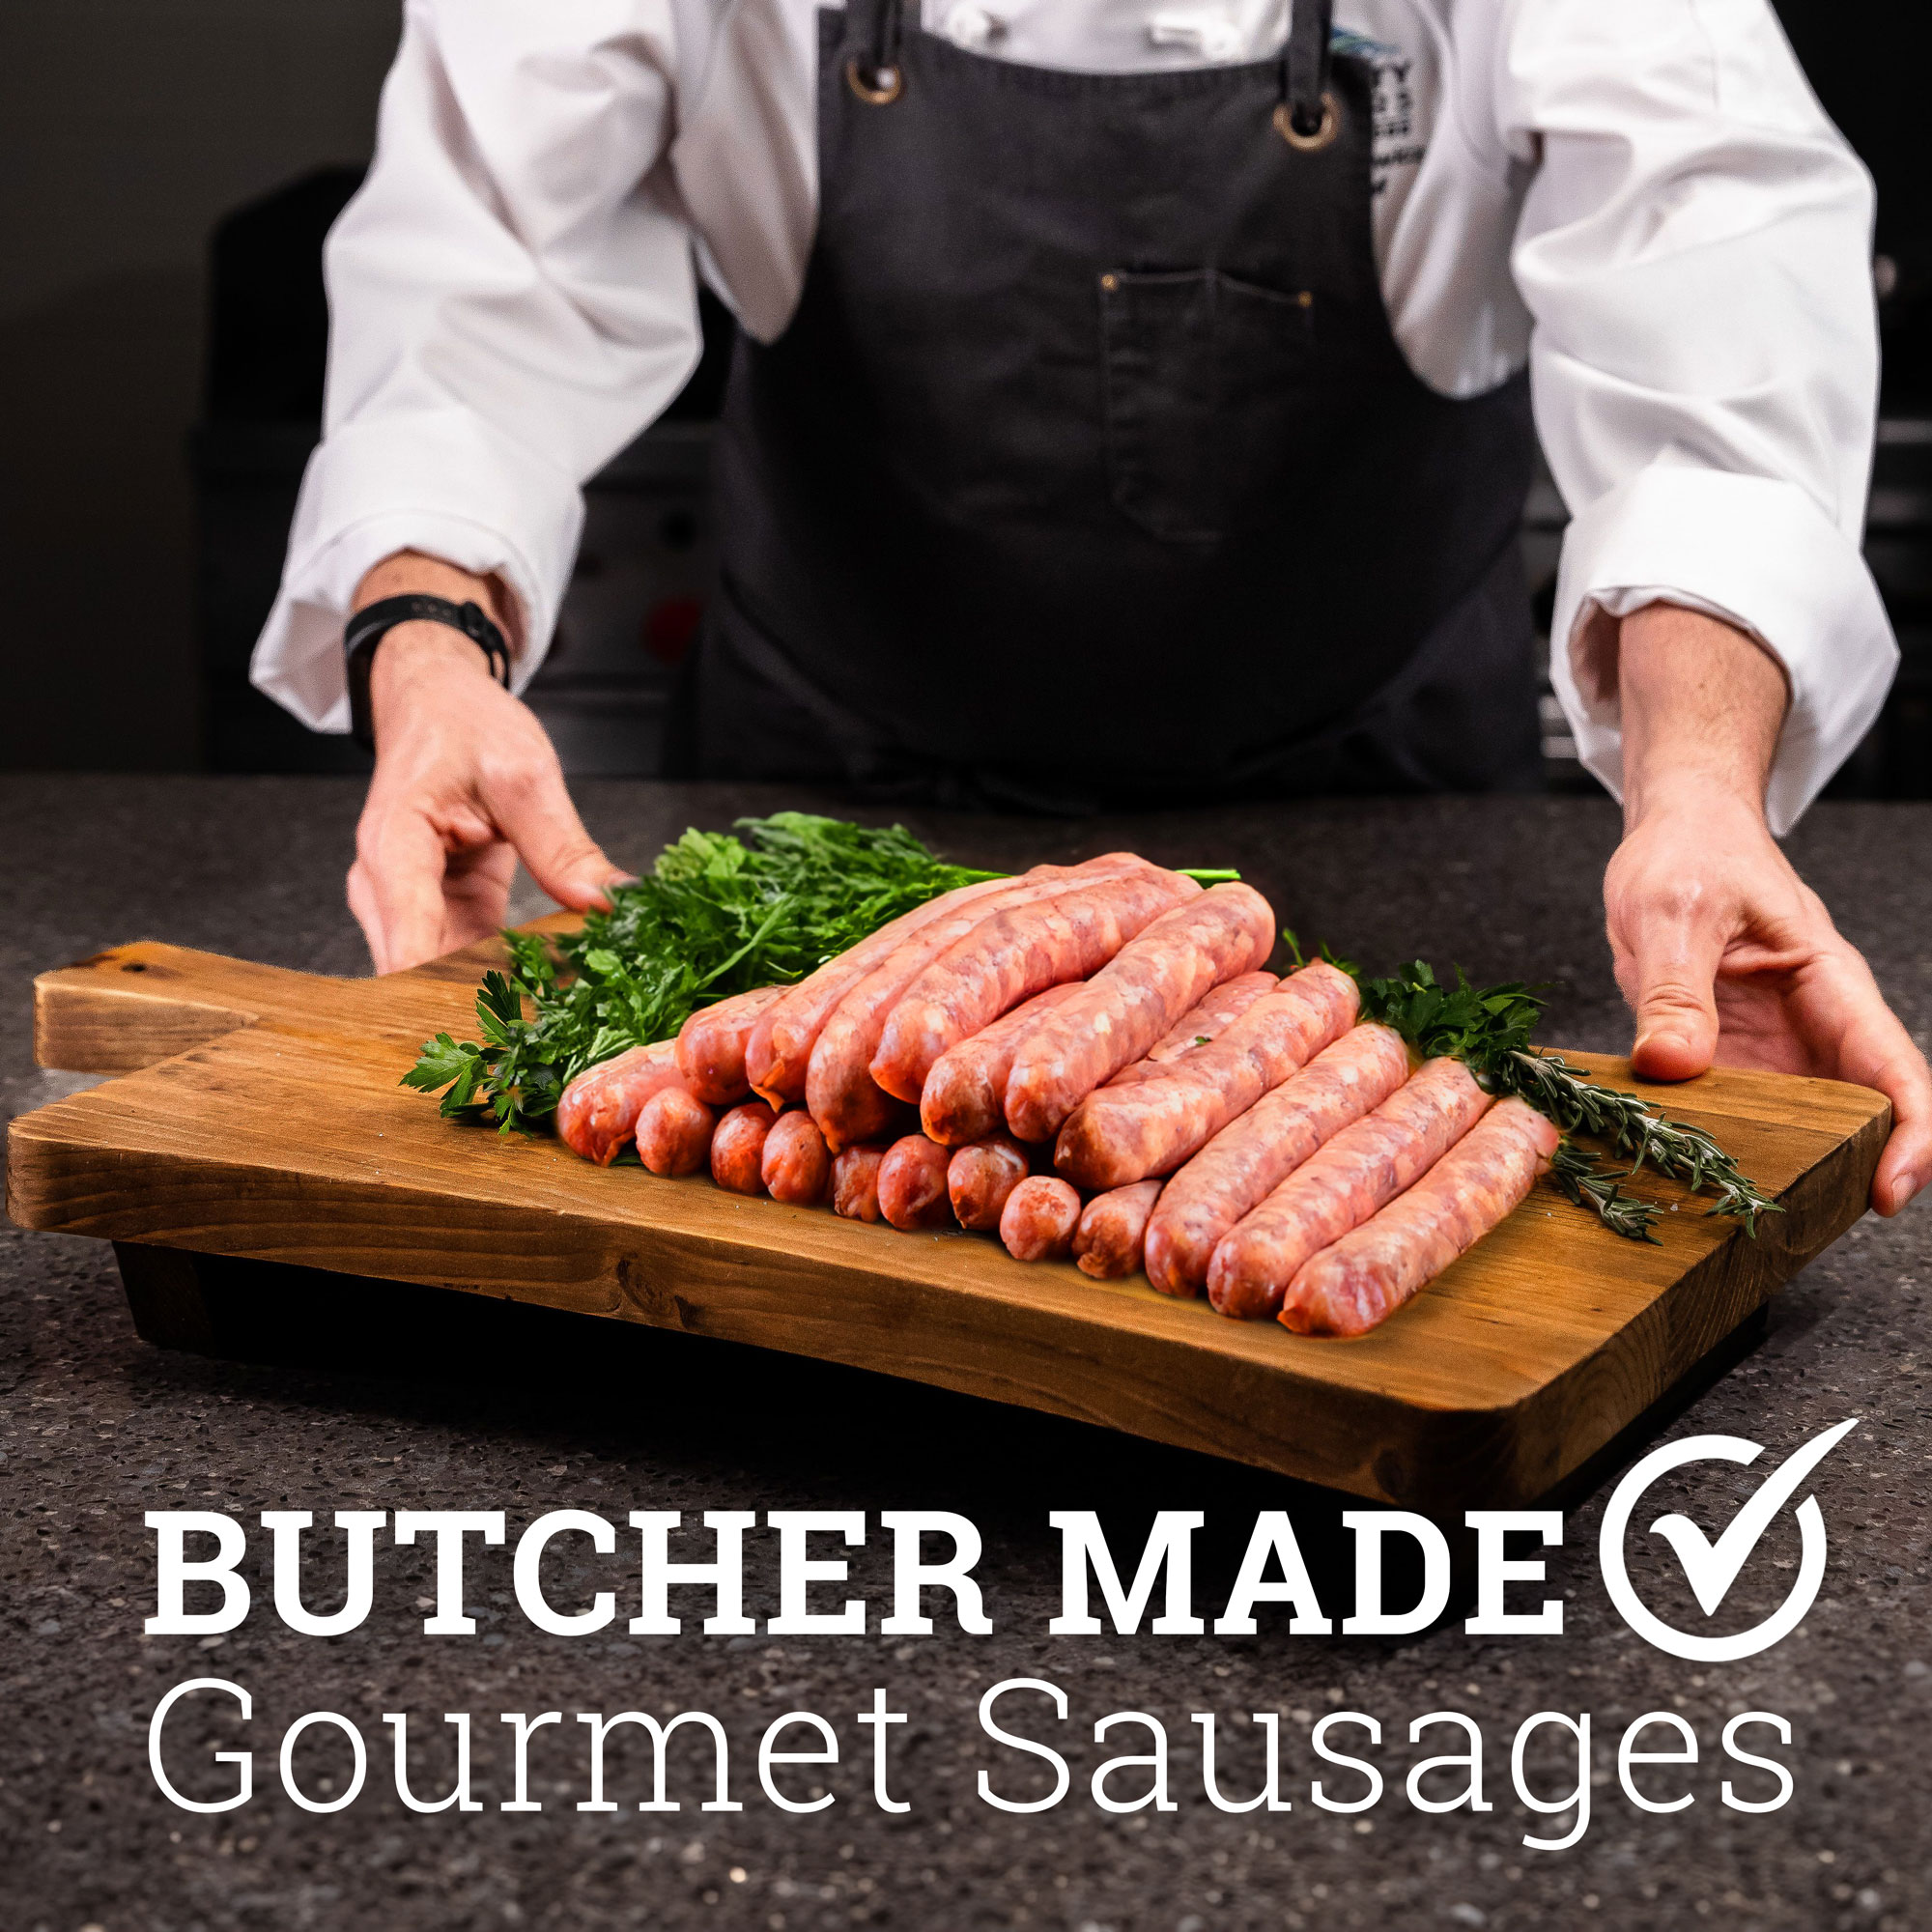 Indulge your culinary creativity with butcher-made sausages